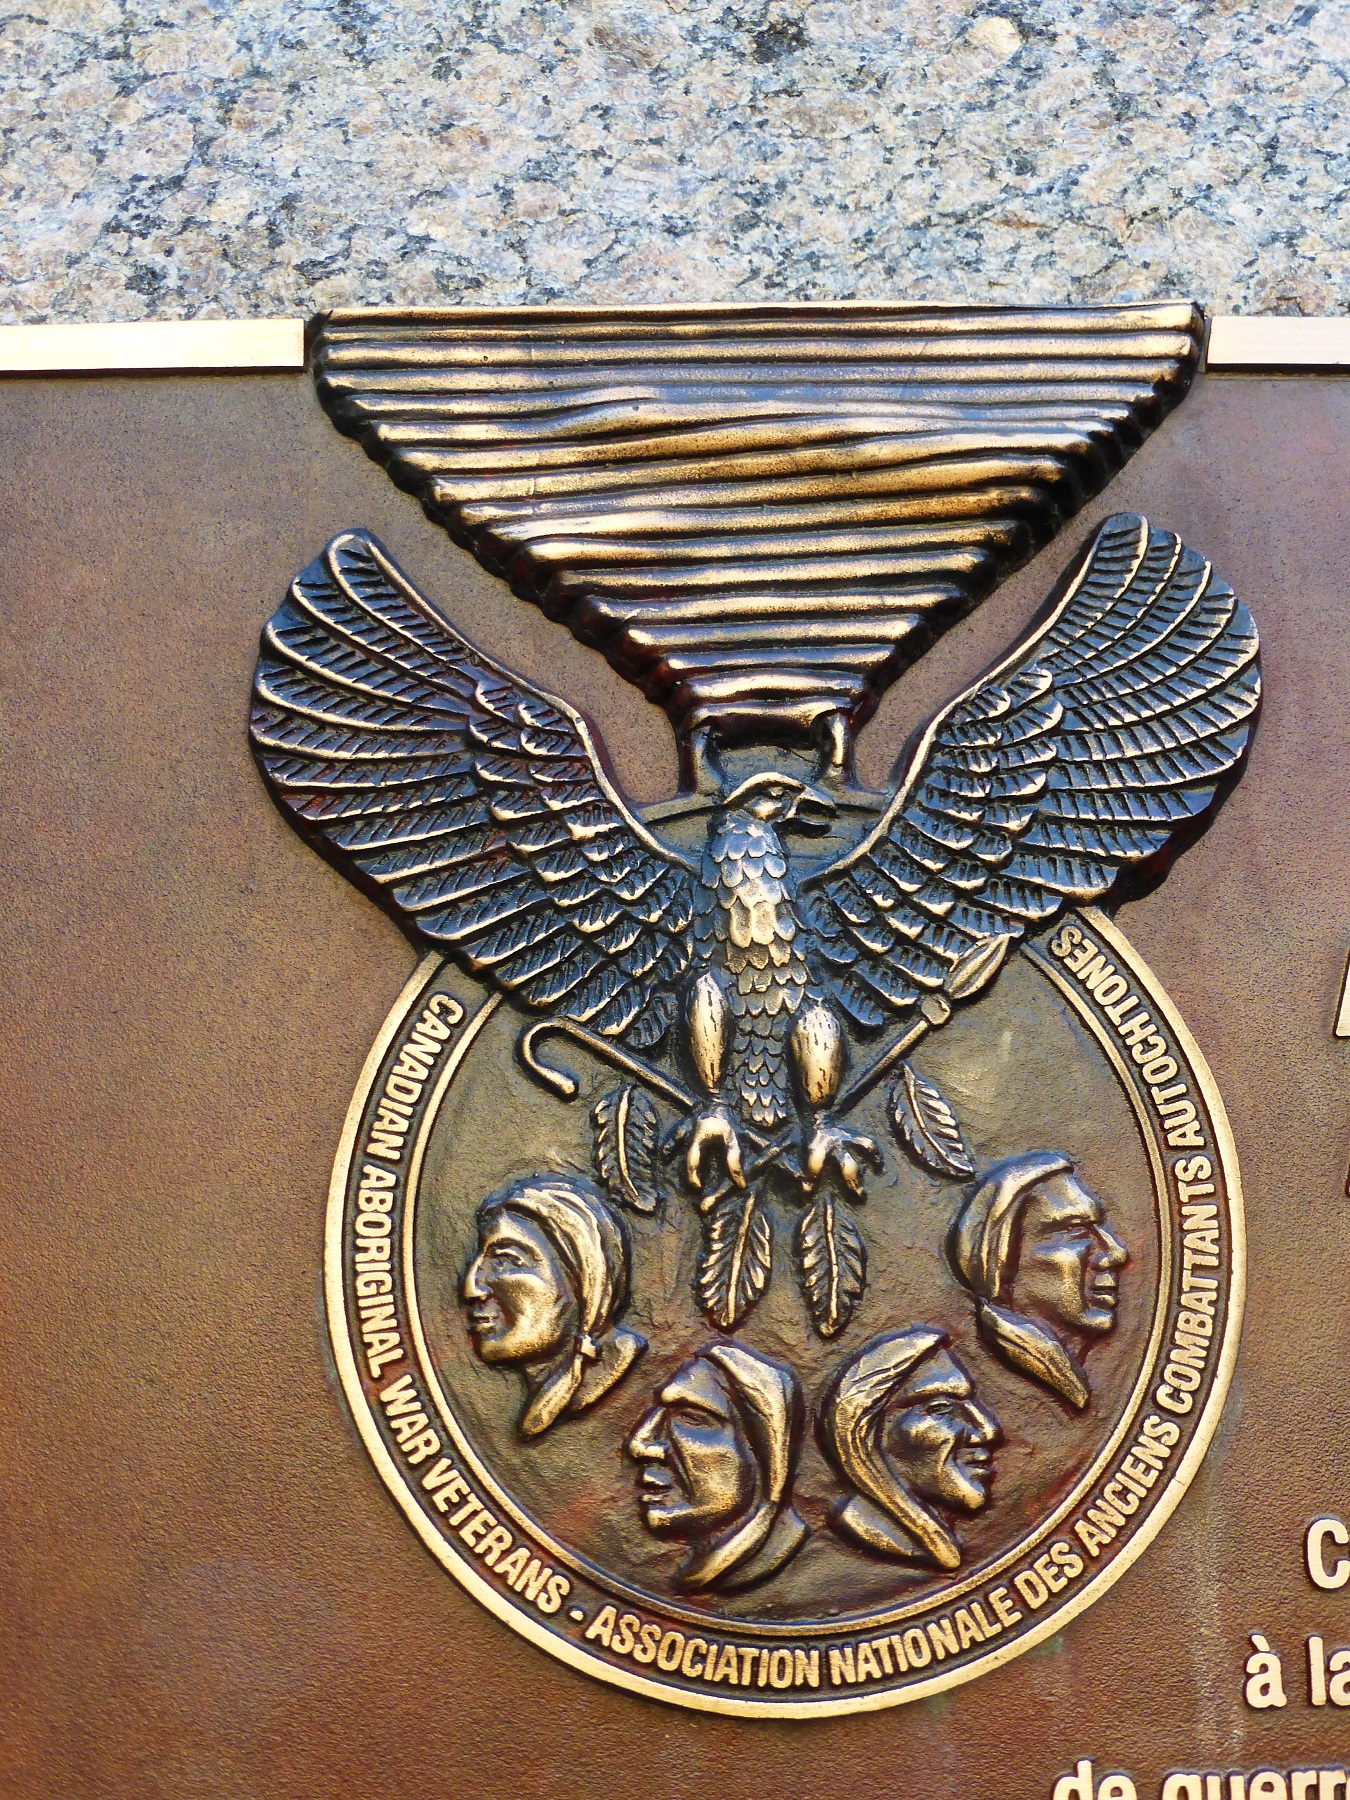 detail on plaque